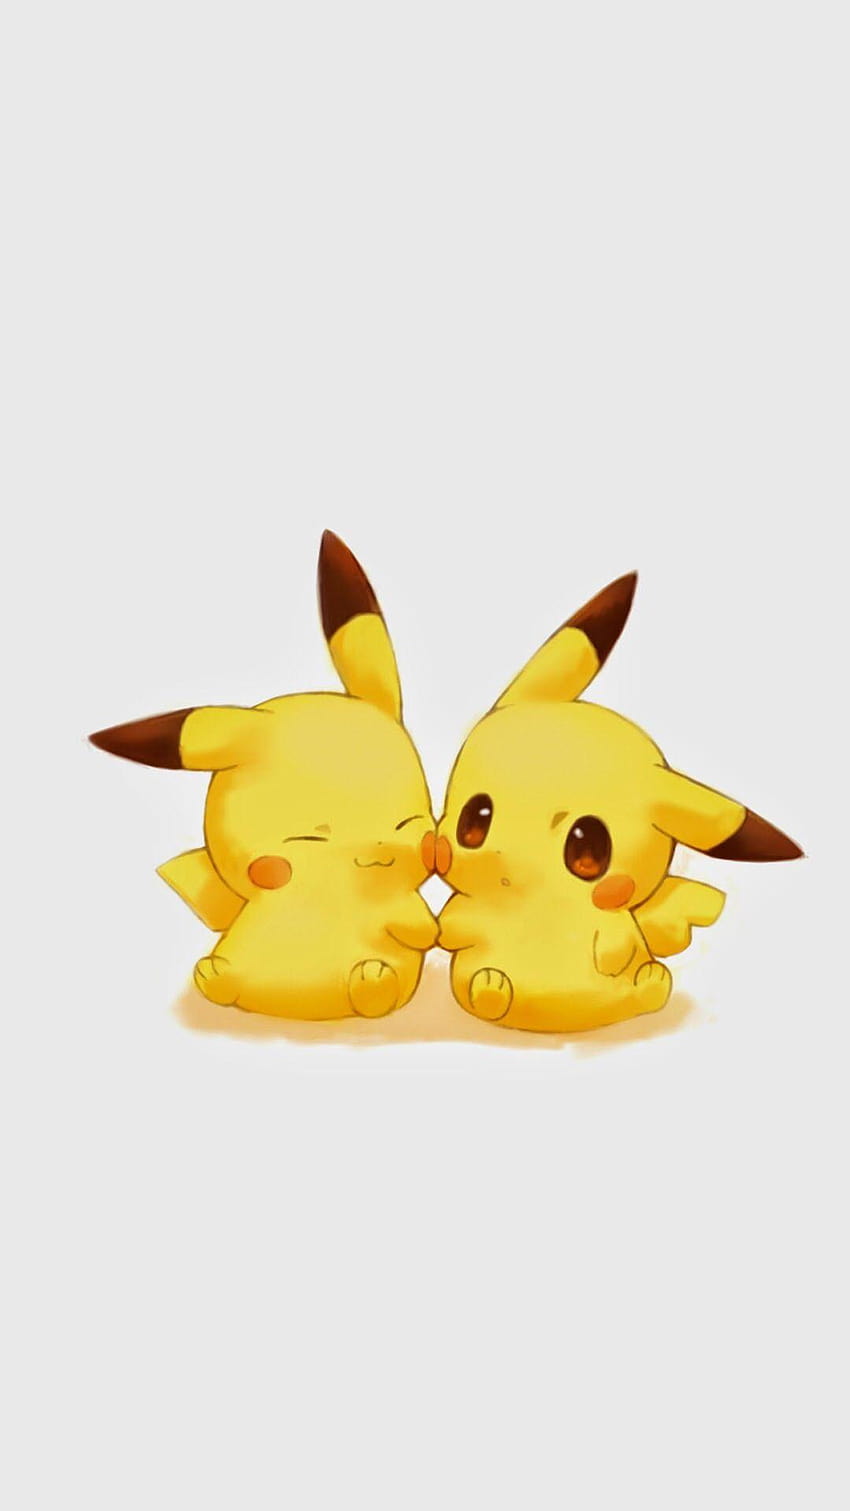 Tap for more funny cute Pikachu ! Pikachu, eevee and pikachu HD ...